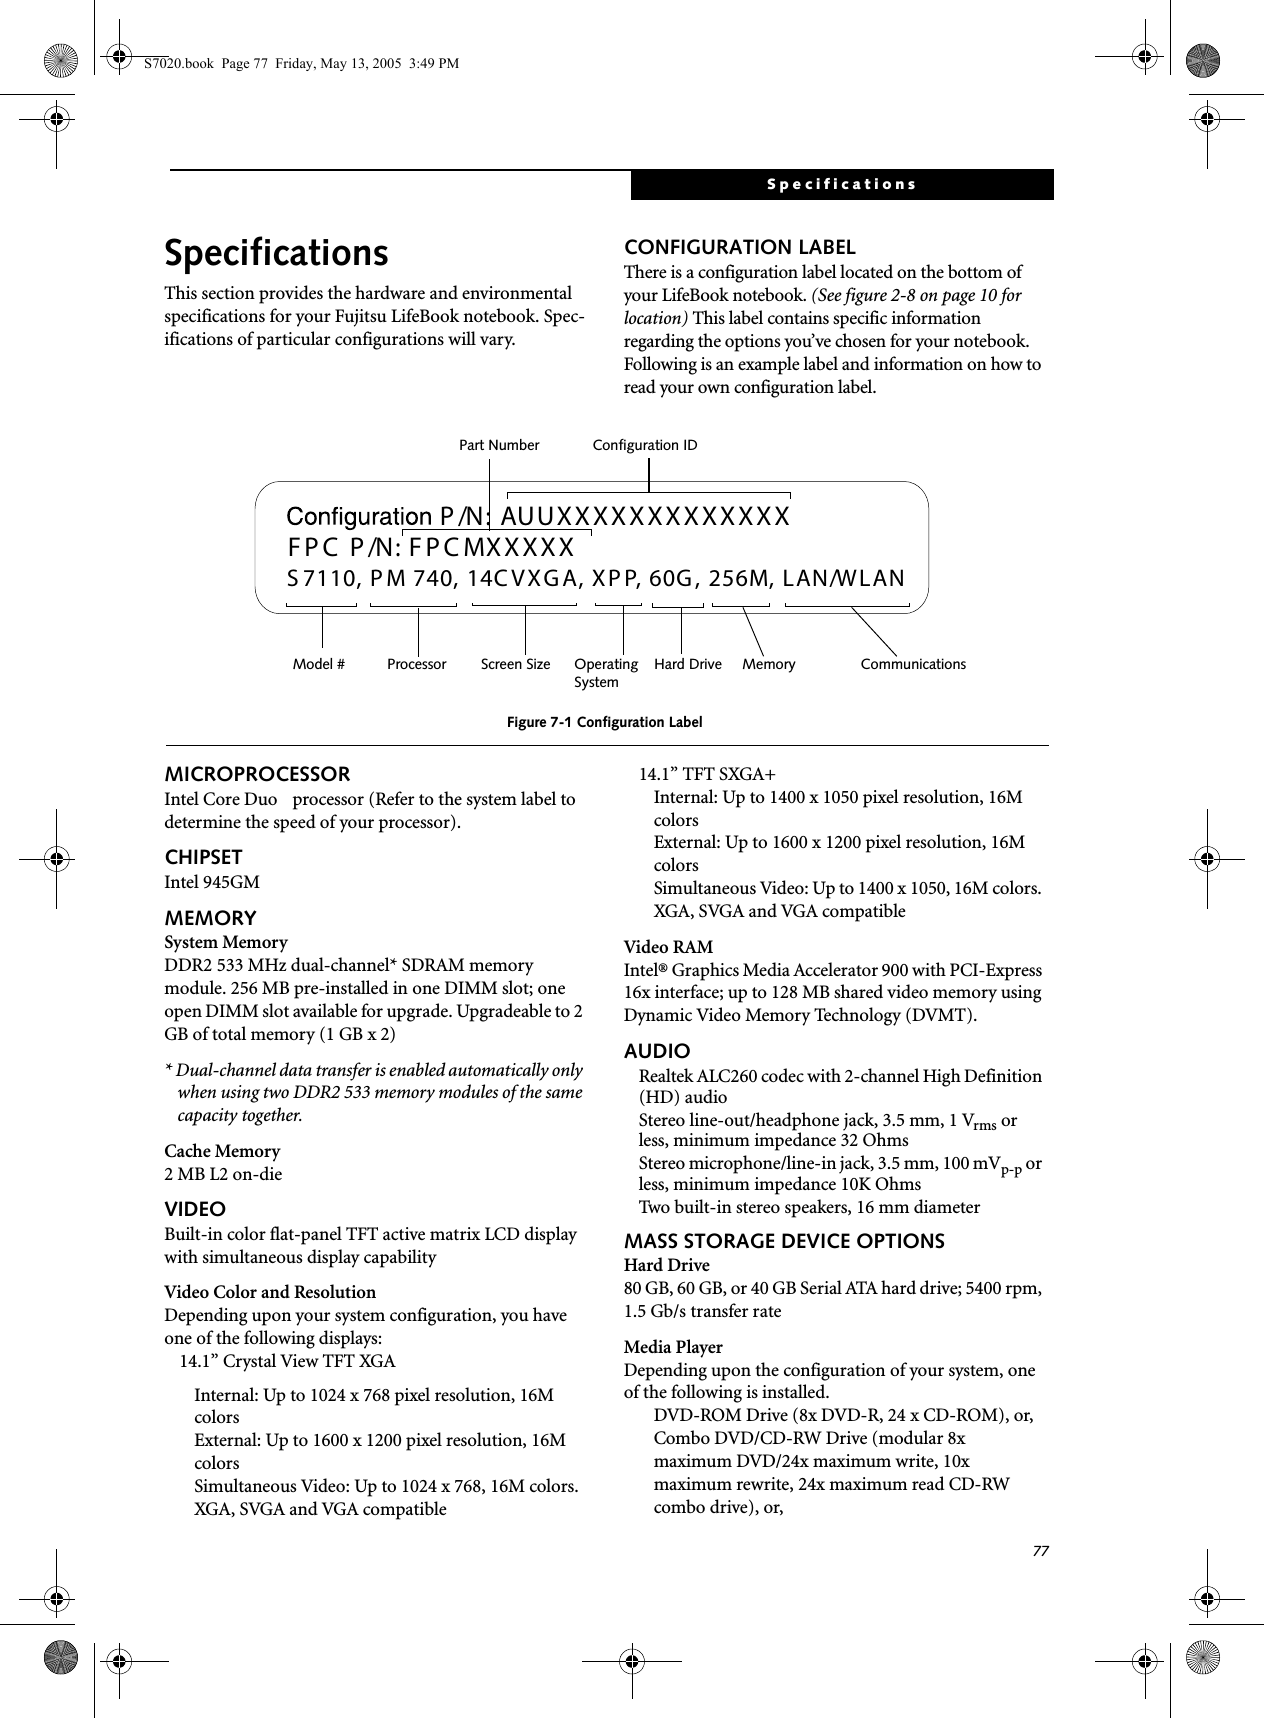 77SpecificationsSpecificationsThis section provides the hardware and environmental specifications for your Fujitsu LifeBook notebook. Spec-ifications of particular configurations will vary.CONFIGURATION LABELThere is a configuration label located on the bottom of your LifeBook notebook. (See figure 2-8 on page 10 for location) This label contains specific information regarding the options you’ve chosen for your notebook. Following is an example label and information on how to read your own configuration label.Figure 7-1 Configuration LabelMICROPROCESSORIntel Core Duo  processor (Refer to the system label to determine the speed of your processor).CHIPSETIntel 945GMMEMORYSystem MemoryDDR2 533 MHz dual-channel* SDRAM memory module. 256 MB pre-installed in one DIMM slot; one open DIMM slot available for upgrade. Upgradeable to 2 GB of total memory (1 GB x 2)* Dual-channel data transfer is enabled automatically only when using two DDR2 533 memory modules of the same capacity together.Cache Memory2 MB L2 on-dieVIDEOBuilt-in color flat-panel TFT active matrix LCD display with simultaneous display capabilityVideo Color and ResolutionDepending upon your system configuration, you have one of the following displays: 14.1” Crystal View TFT XGAInternal: Up to 1024 x 768 pixel resolution, 16M colorsExternal: Up to 1600 x 1200 pixel resolution, 16M colorsSimultaneous Video: Up to 1024 x 768, 16M colors. XGA, SVGA and VGA compatible14.1” TFT SXGA+Internal: Up to 1400 x 1050 pixel resolution, 16M colorsExternal: Up to 1600 x 1200 pixel resolution, 16M colorsSimultaneous Video: Up to 1400 x 1050, 16M colors. XGA, SVGA and VGA compatibleVideo RAMIntel® Graphics Media Accelerator 900 with PCI-Express 16x interface; up to 128 MB shared video memory using Dynamic Video Memory Technology (DVMT). AUDIORealtek ALC260 codec with 2-channel High Definition (HD) audioStereo line-out/headphone jack, 3.5 mm, 1 Vrms or less, minimum impedance 32 OhmsStereo microphone/line-in jack, 3.5 mm, 100 mVp-p or less, minimum impedance 10K OhmsTwo built-in stereo speakers, 16 mm diameterMASS STORAGE DEVICE OPTIONSHard Drive80 GB, 60 GB, or 40 GB Serial ATA hard drive; 5400 rpm, 1.5 Gb/s transfer rateMedia PlayerDepending upon the configuration of your system, one of the following is installed.DVD-ROM Drive (8x DVD-R, 24 x CD-ROM), or,Combo DVD/CD-RW Drive (modular 8x maximum DVD/24x maximum write, 10x maximum rewrite, 24x maximum read CD-RW combo drive), or,  AUUXXXXXXXXXXXXXS 7110, P M 740, 14C VXG A, X P P, 60G , 256M, LAN/W LANP /N:  F P C  P /N: FP C MXXXXXOperating Hard Drive Configuration IDPart NumberProcessorModel # Screen Size MemorySystemCommunicationsS7020.book  Page 77  Friday, May 13, 2005  3:49 PM